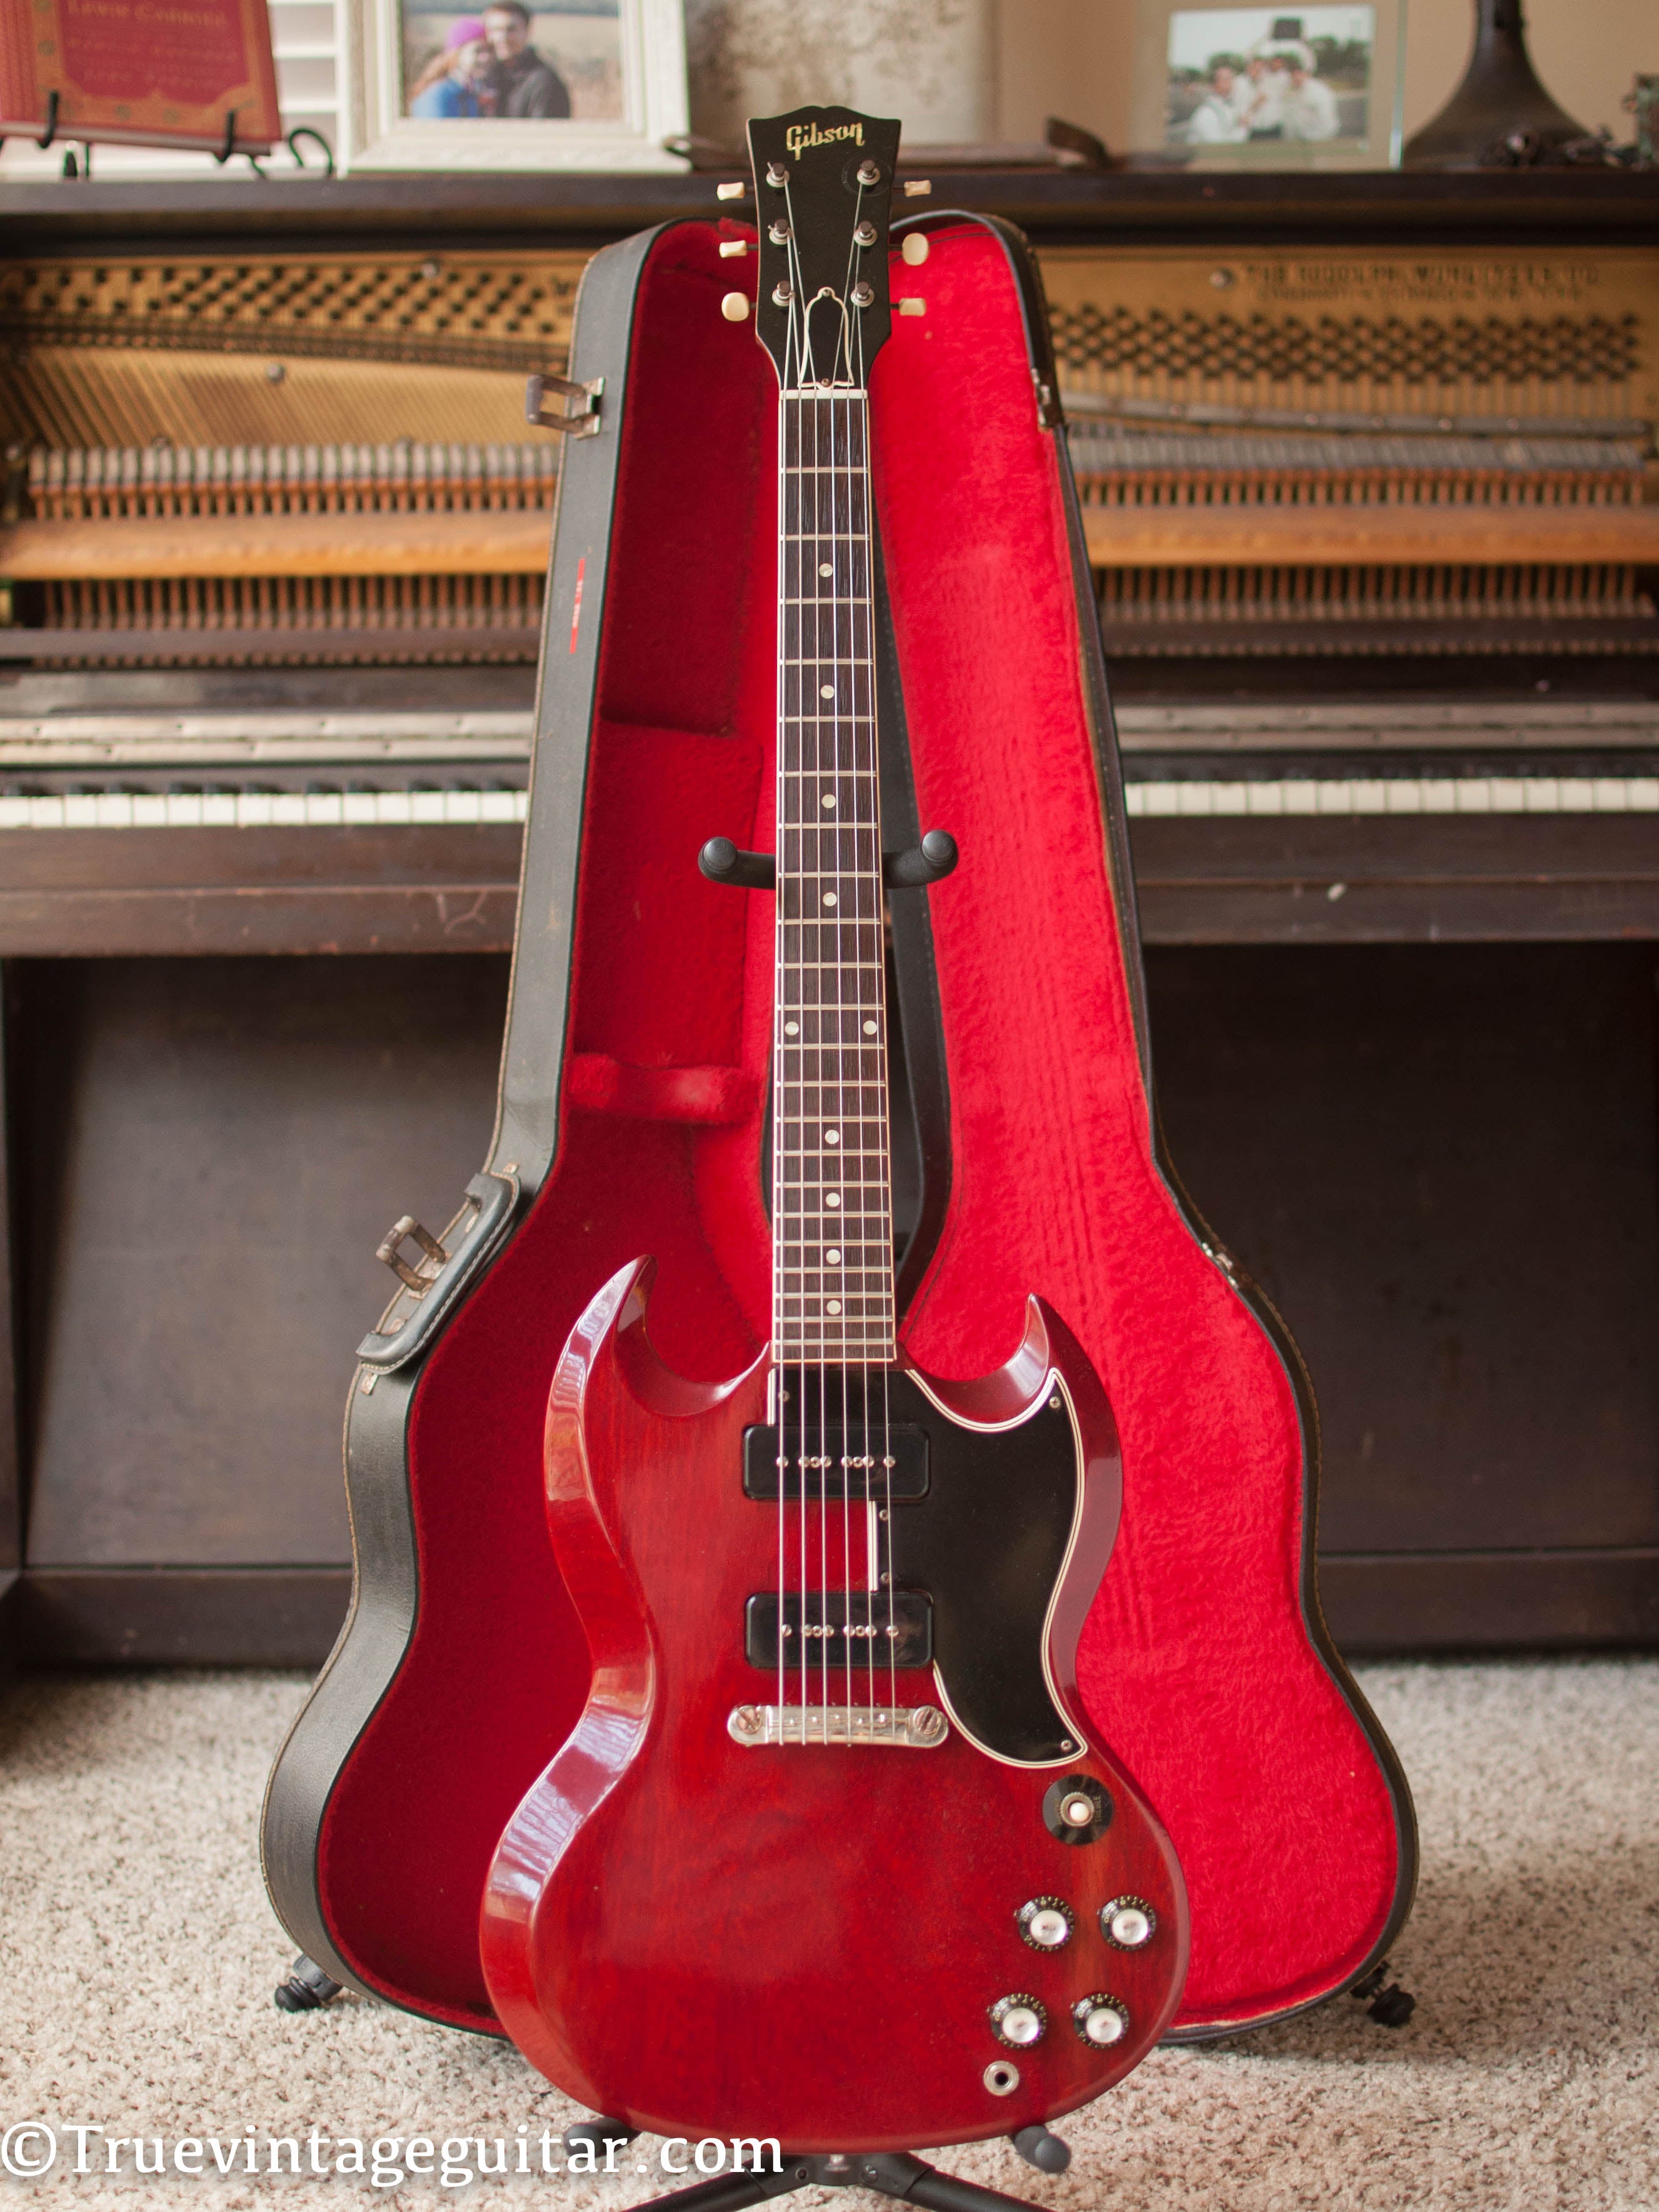 1962 Gibson SG Special cherry red electric guitar